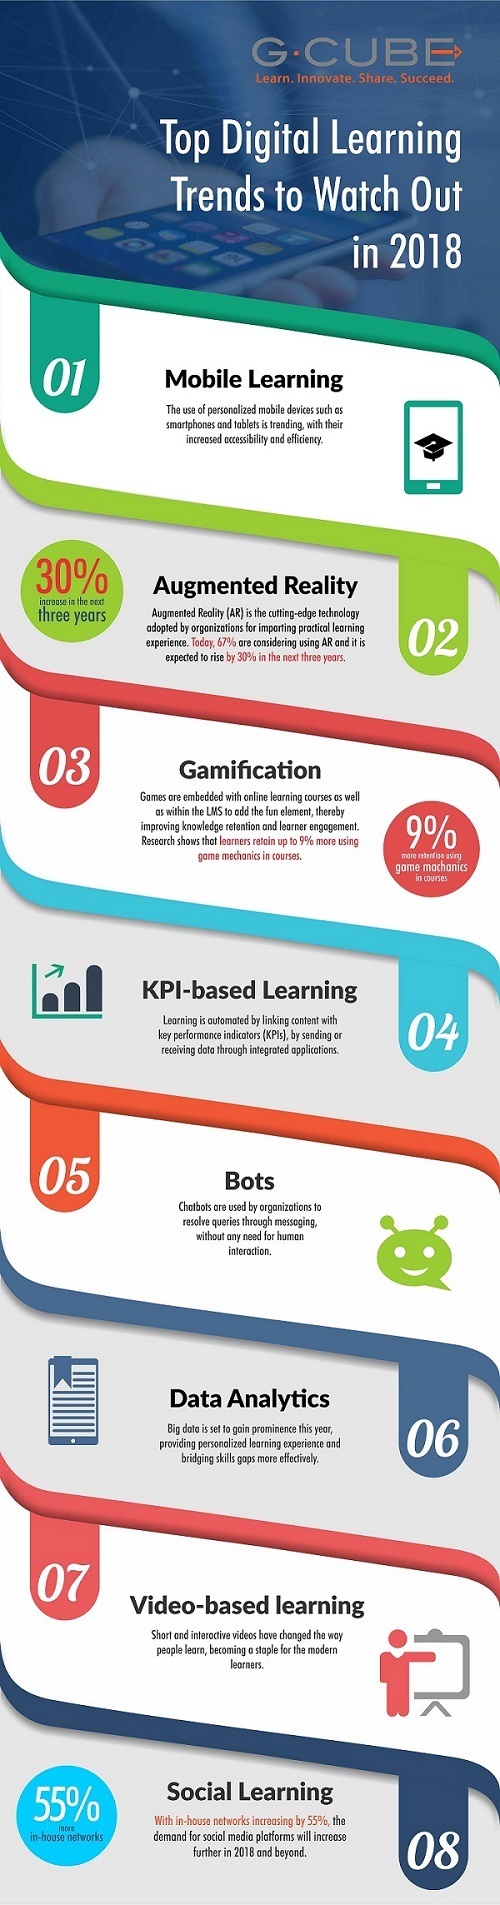 Top Digital Learning Trends To Watch Out In 2018 Infographic